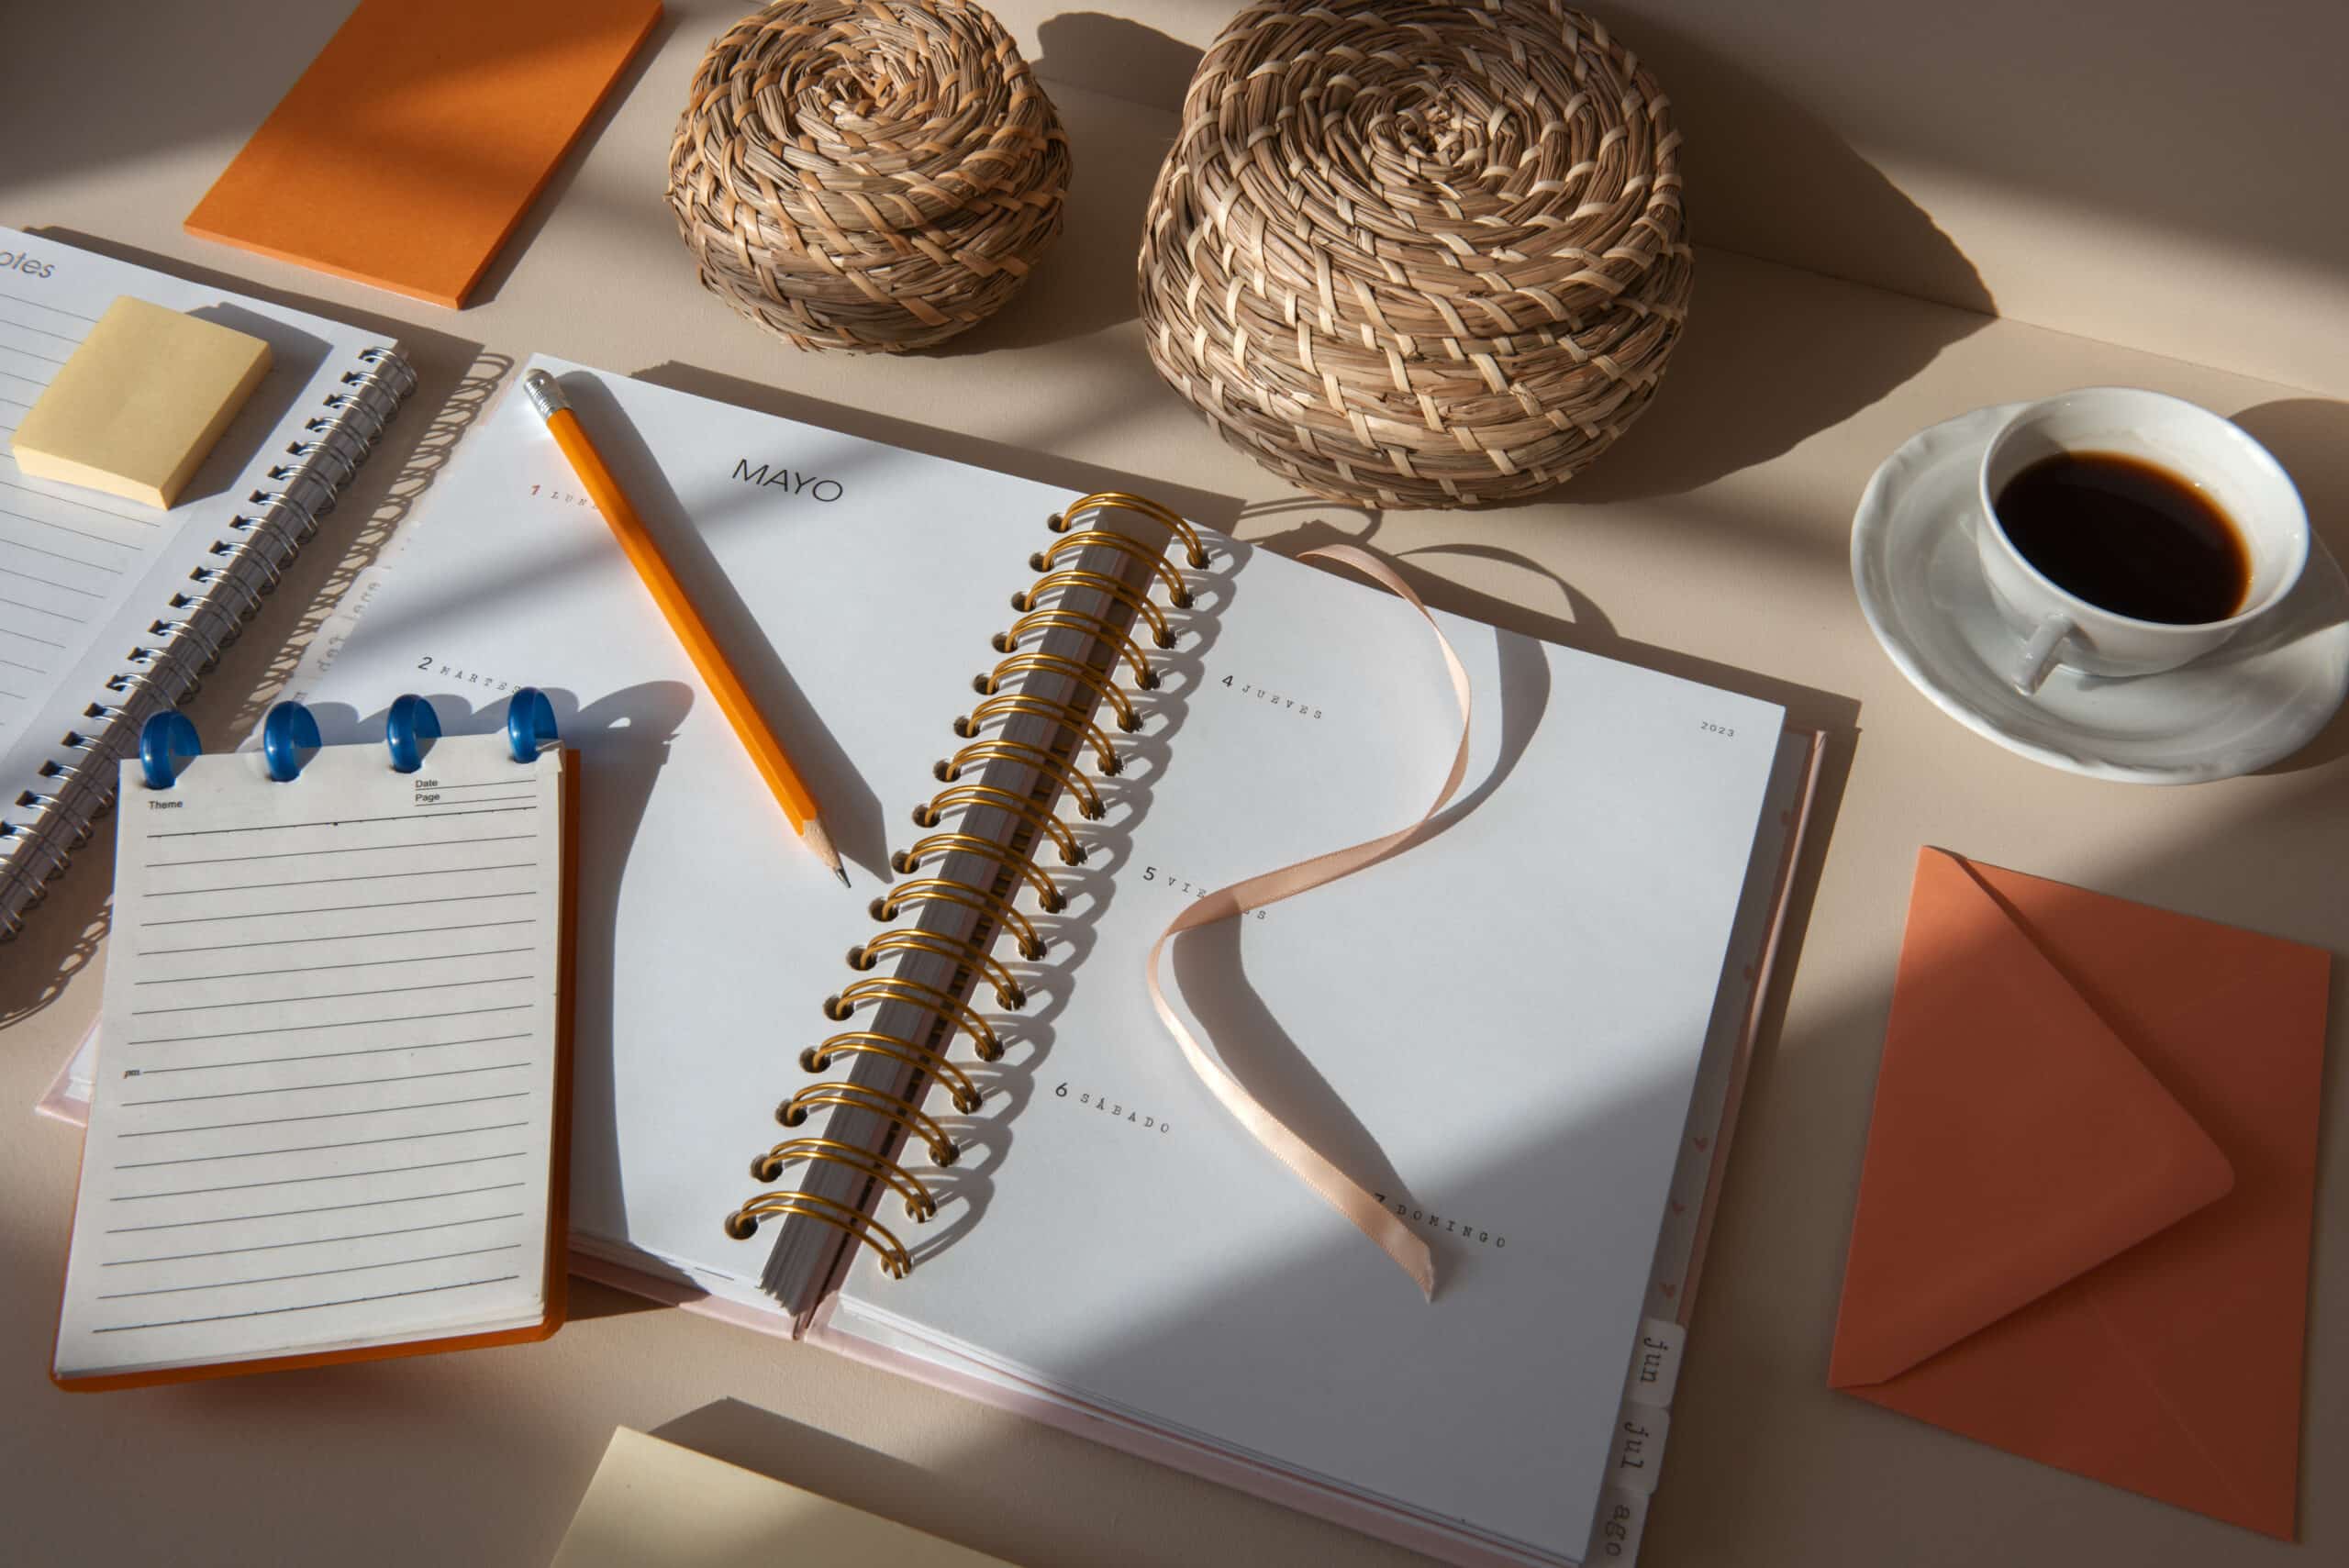 Journalling can be a form of self-care, for you to reconnect and better understand yourself.